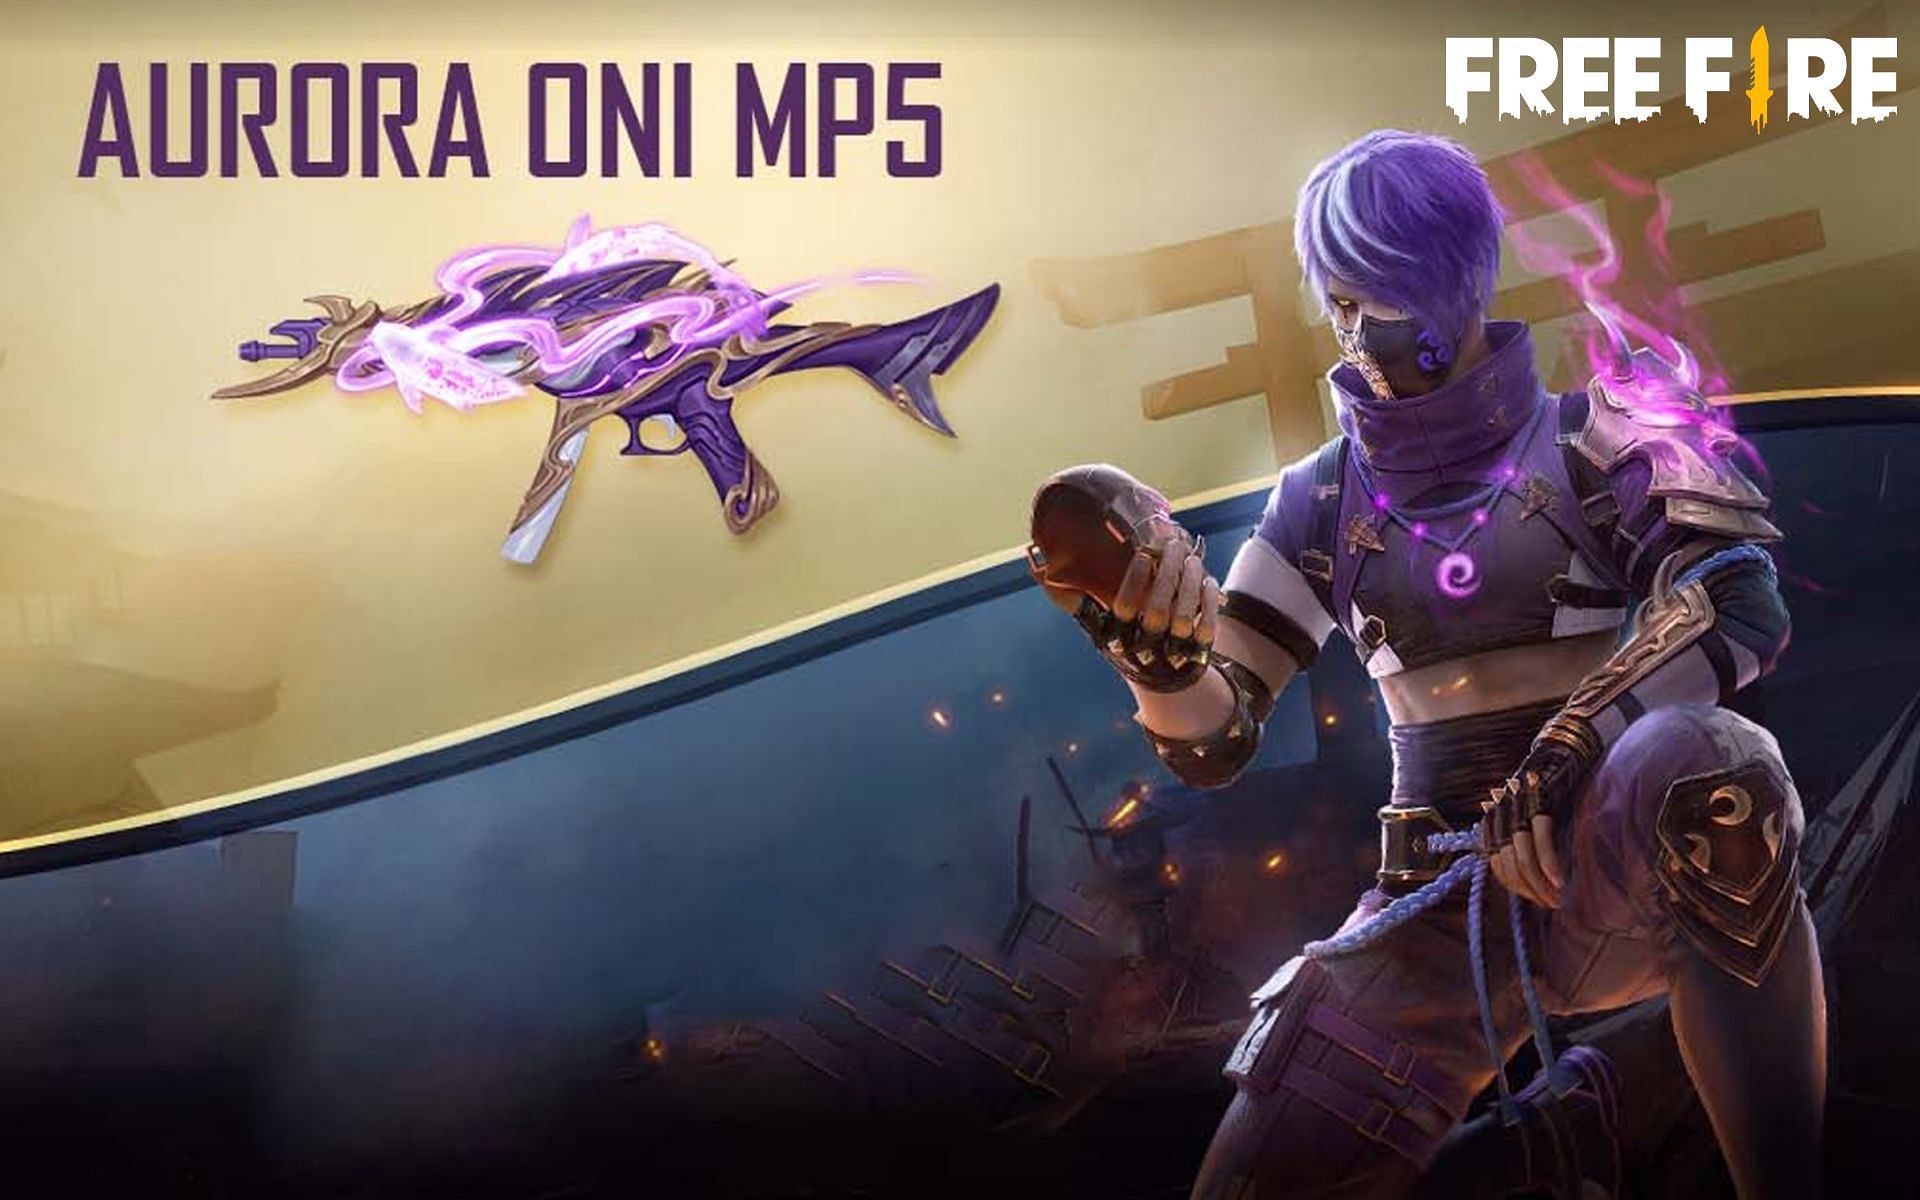 These two rewards are present in the event (Image via Free Fire)